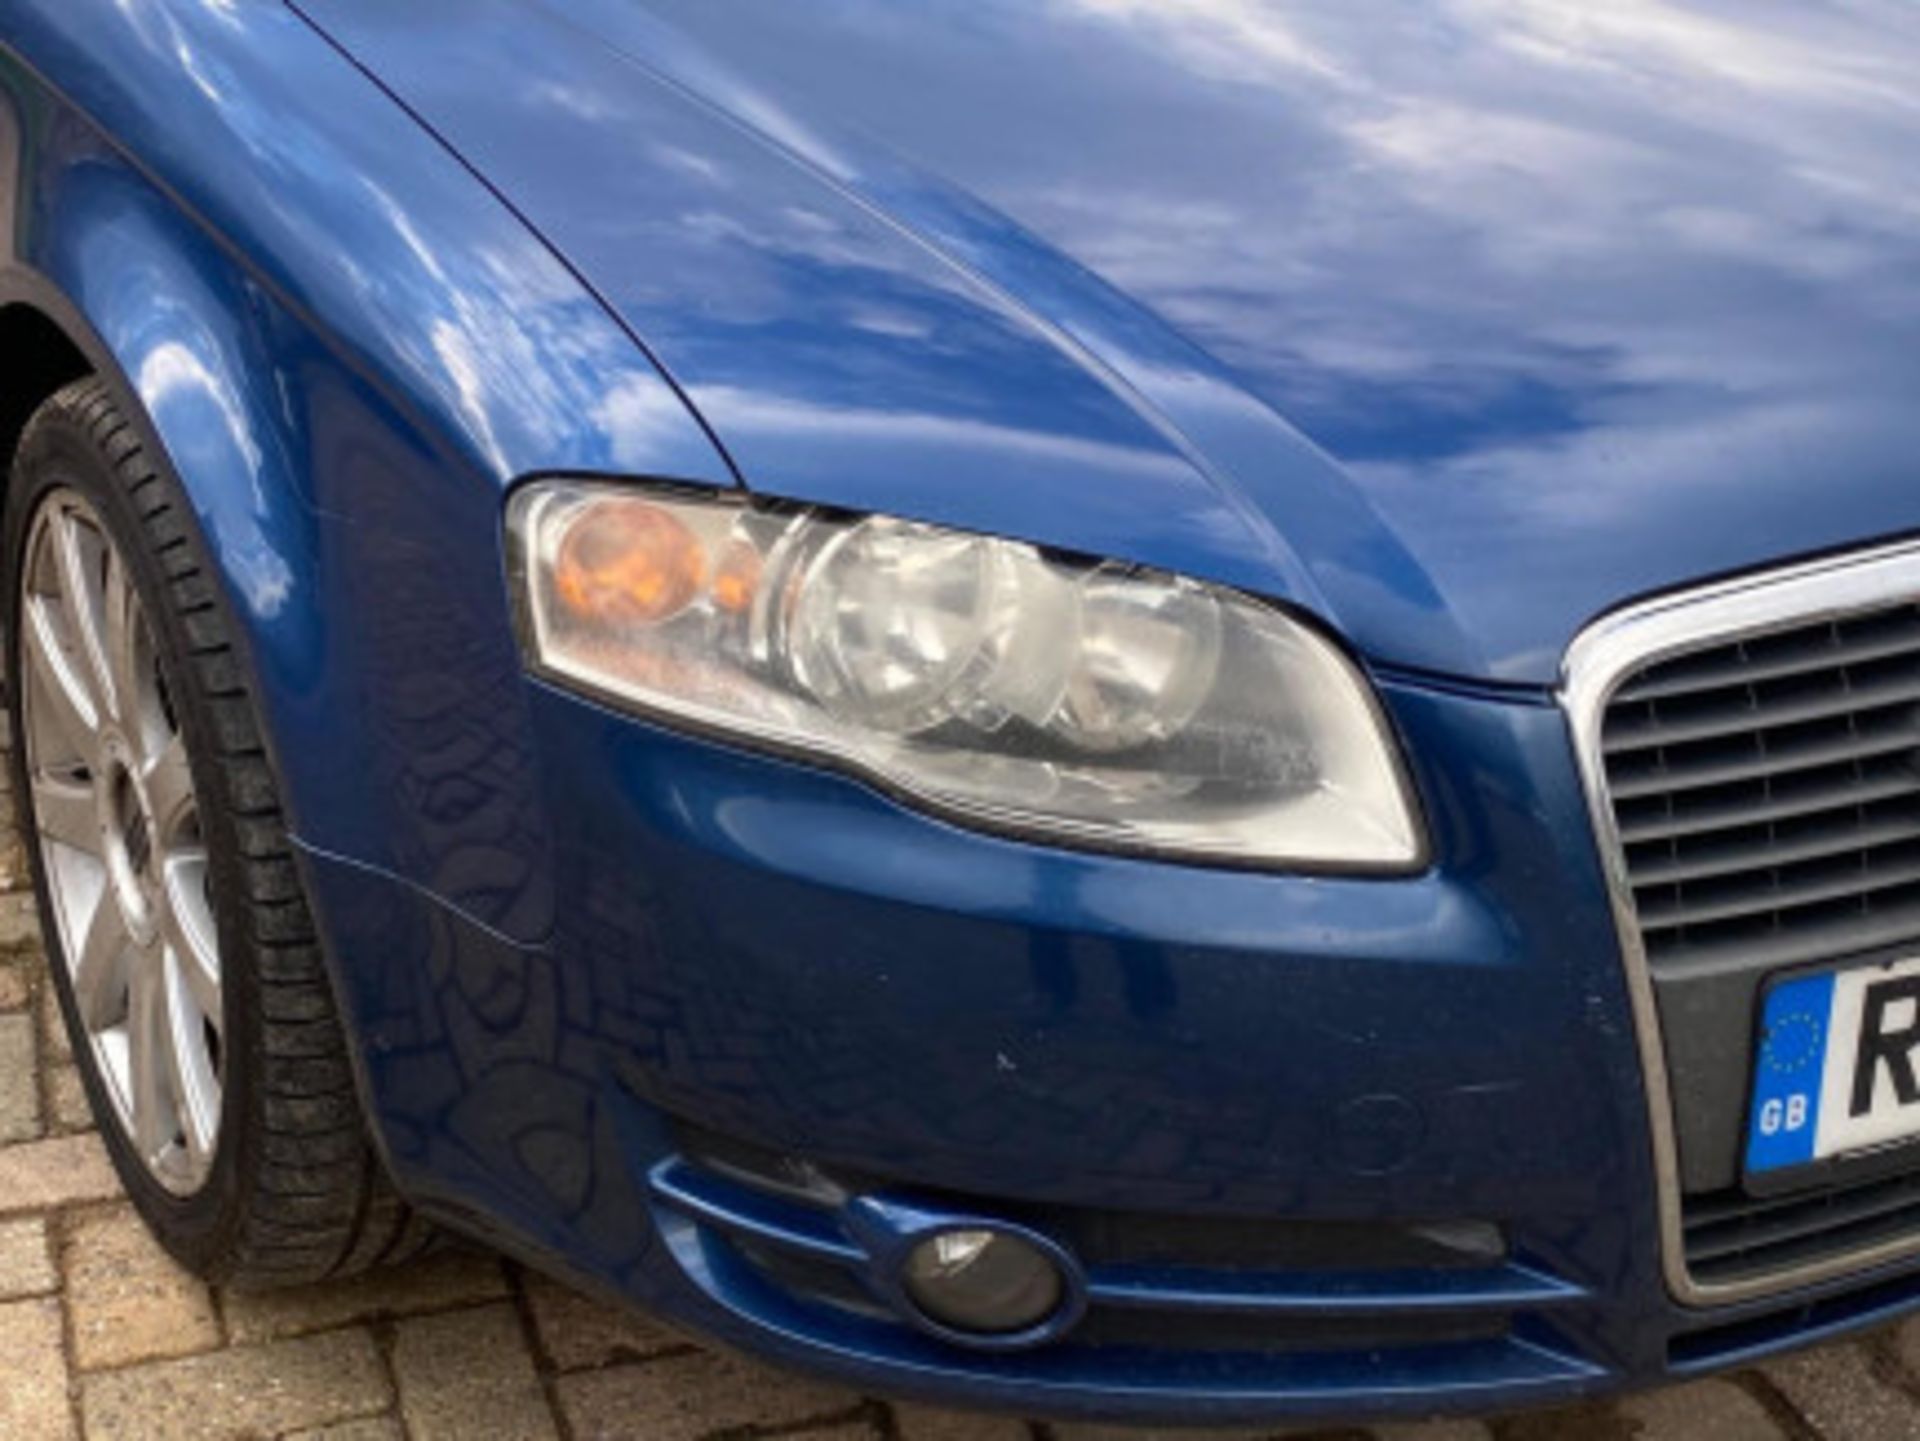 AUDI A4 AVANT 1.9 TDI SE 5DR ESTATE - RARE AND RELIABLE LUXURY WAGON >>--NO VAT ON HAMMER--<< - Image 23 of 63